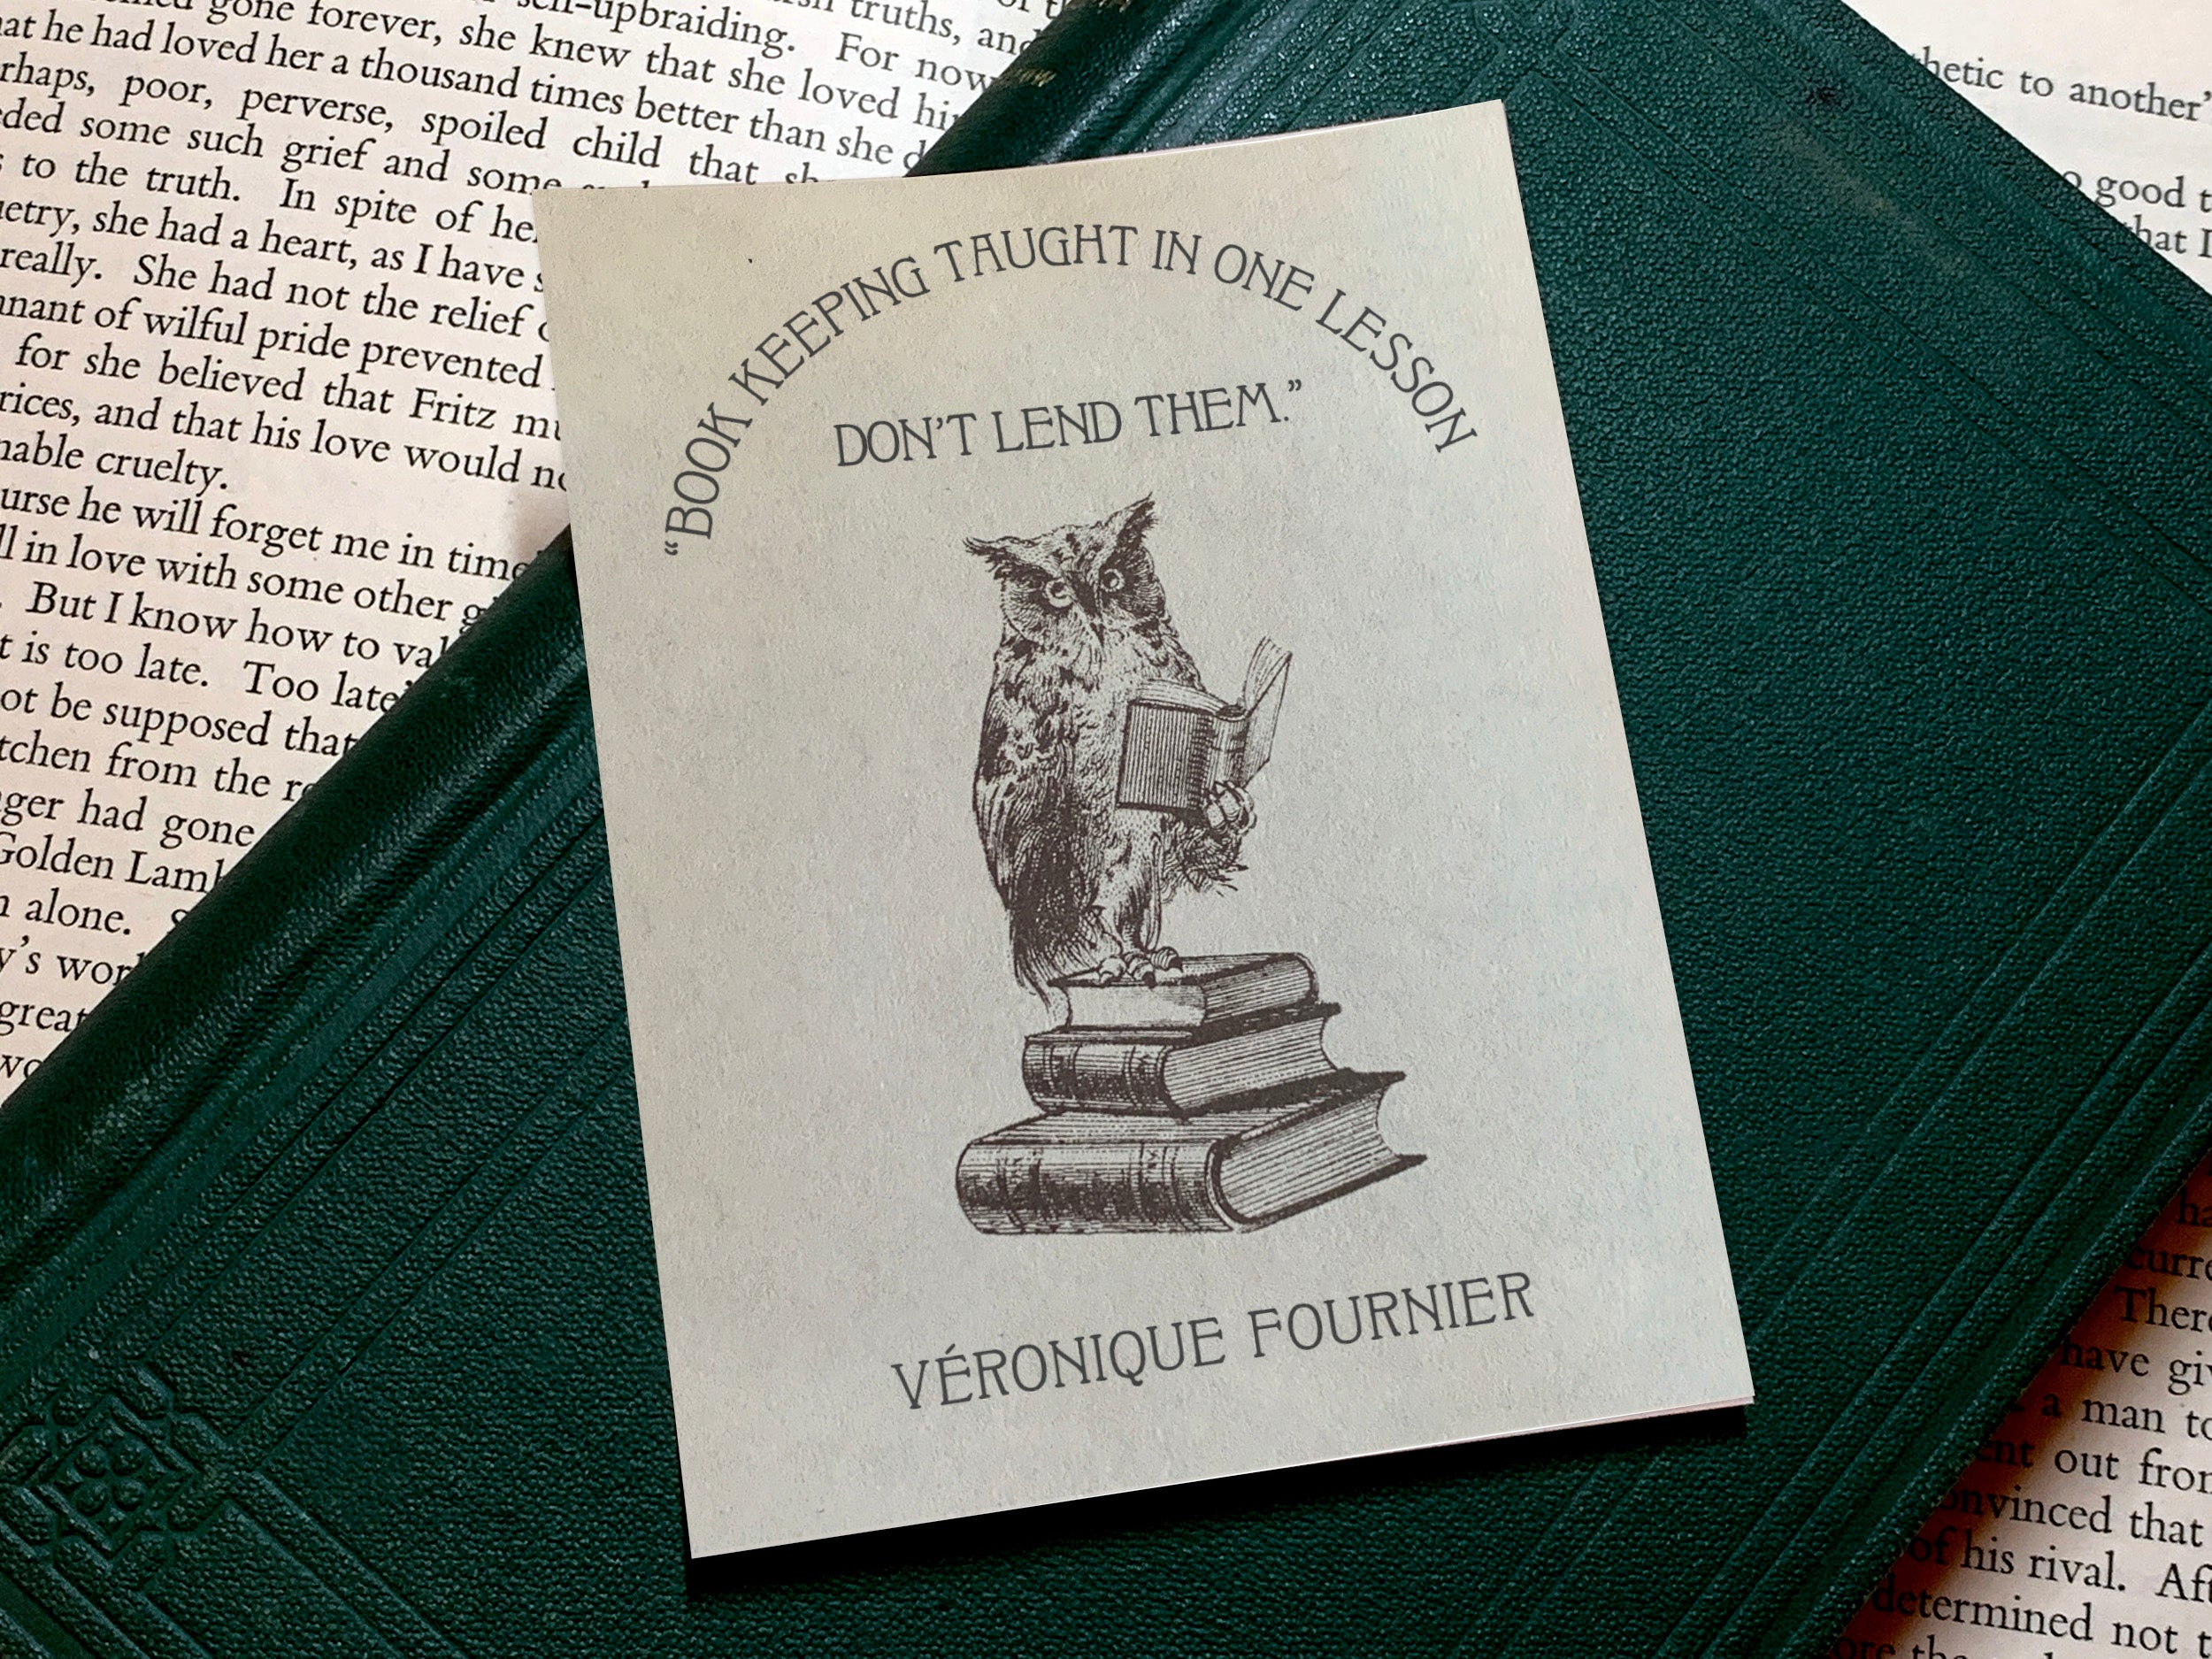 Prose and Poetry, Personalized Ex-Libris Bookplates, Crafted on Traditional Gummed Paper, 3in x 4in, Set of 30